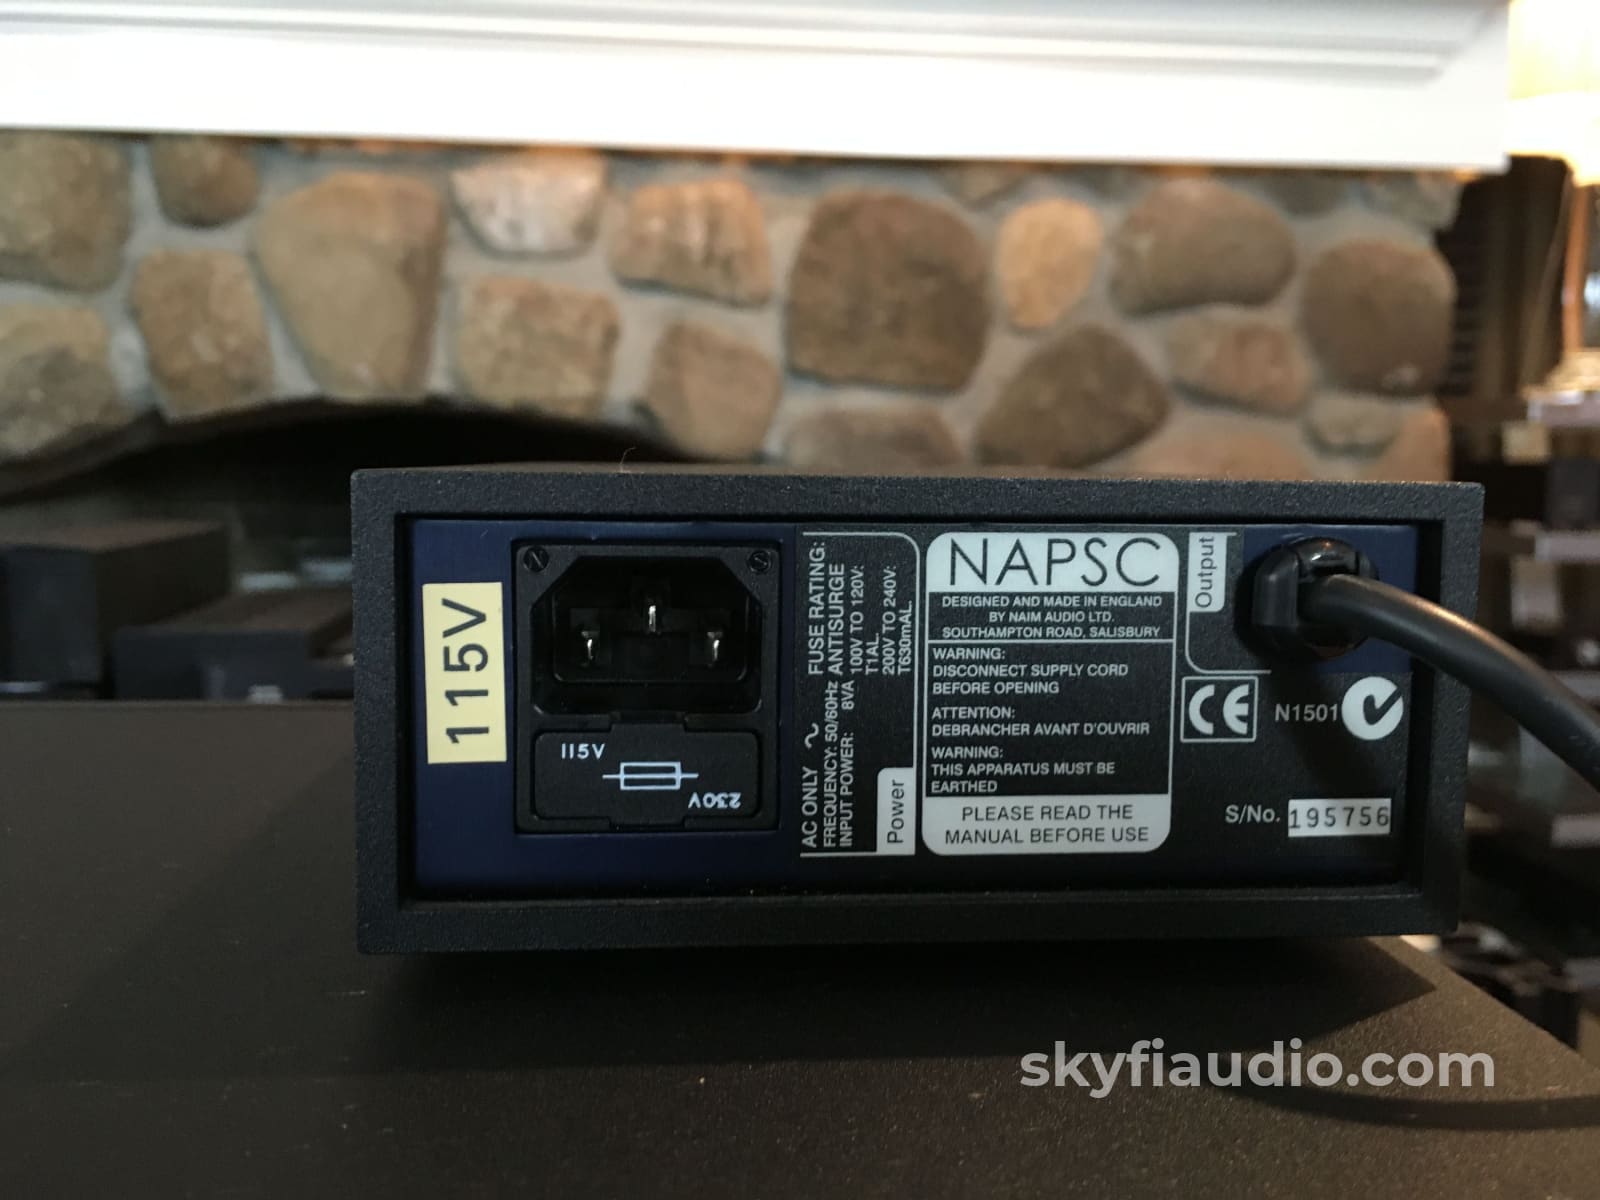 Naim Audio Nac-202 Solid State Preamp With Napsc Power Supply Preamplifier